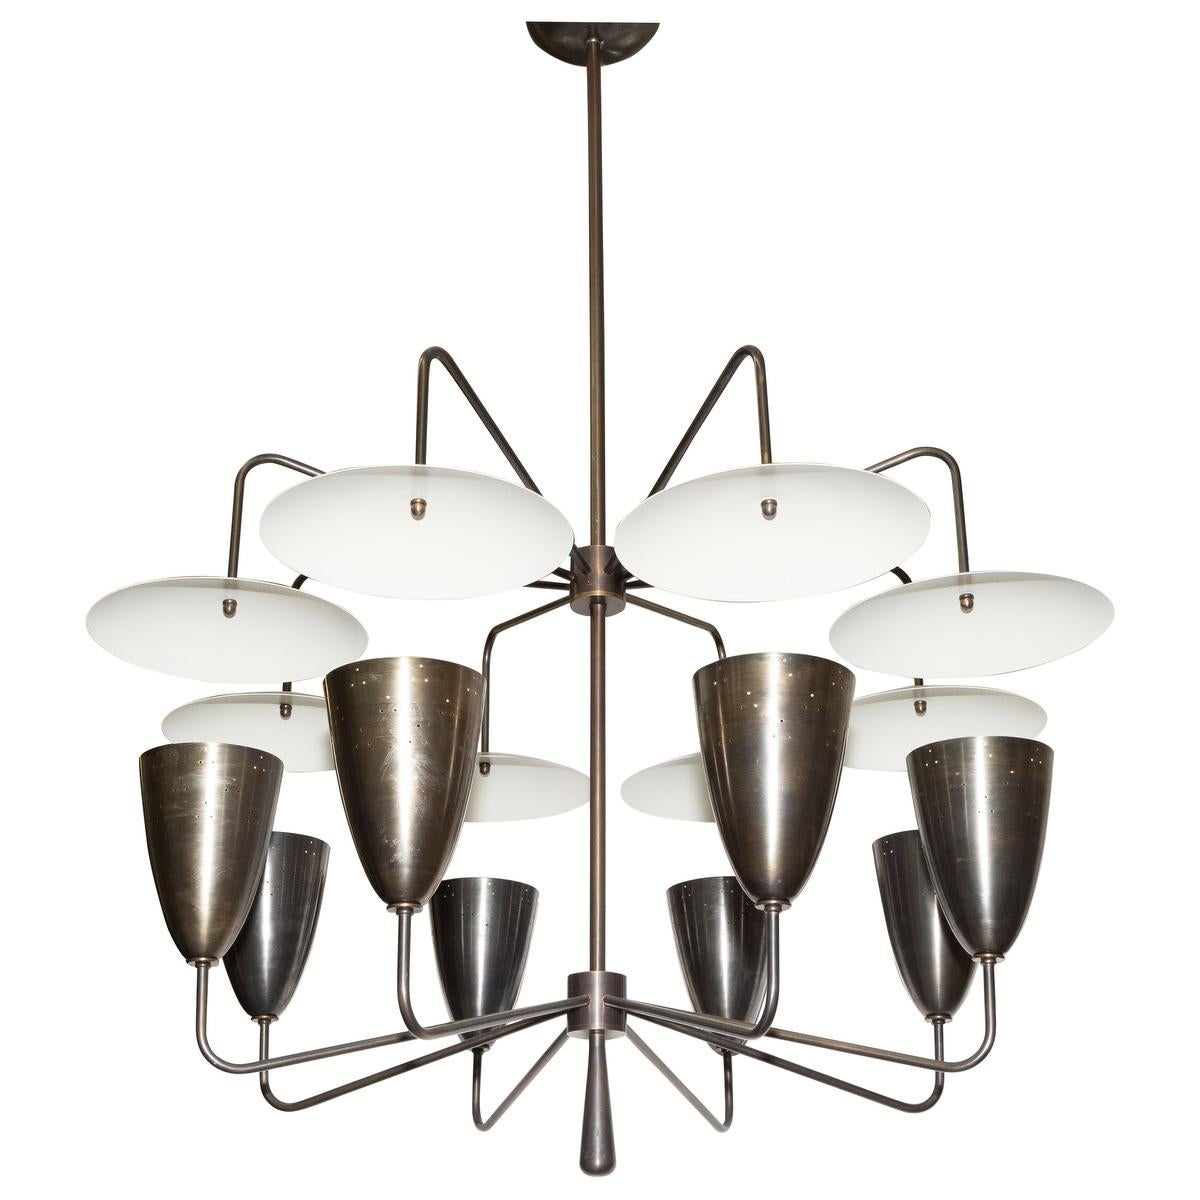 Eight-arm, bronze finish reflector shade chandelier in the style of Stilnovo by Marcelo Bessa for Spark Interior.